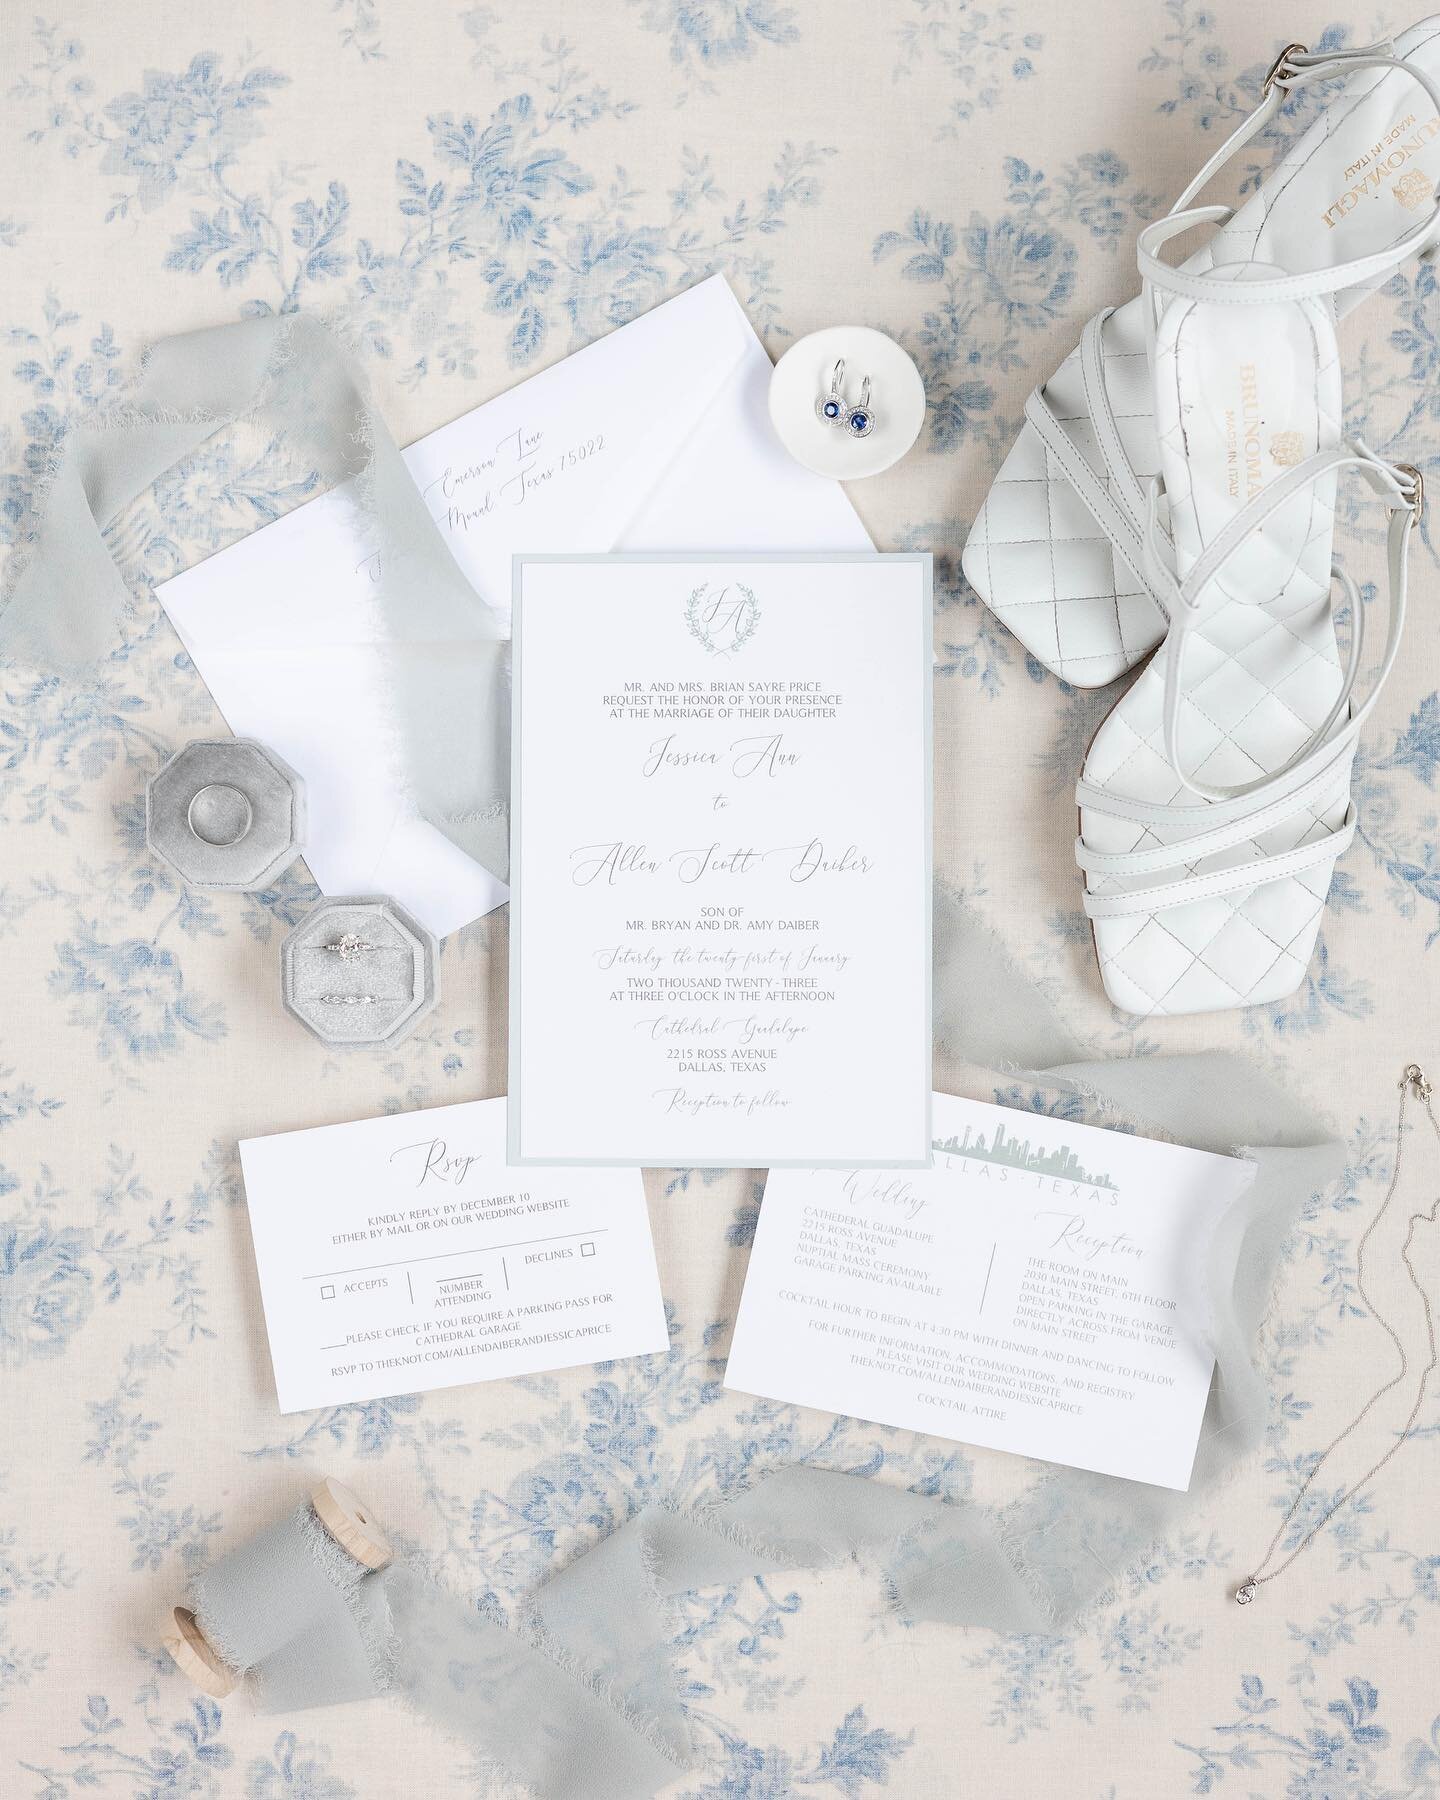 Here&rsquo;s a beautiful flatlay picture for your Monday morning! 😍

#2023dallaswedding #texaswedding #texasweddingplanner #dfwweddingplanners #dfweddings #dallasbride #dfwweddings #txbride  #theknotweddings #weddingcoordinating #bridesofnorthtexas 